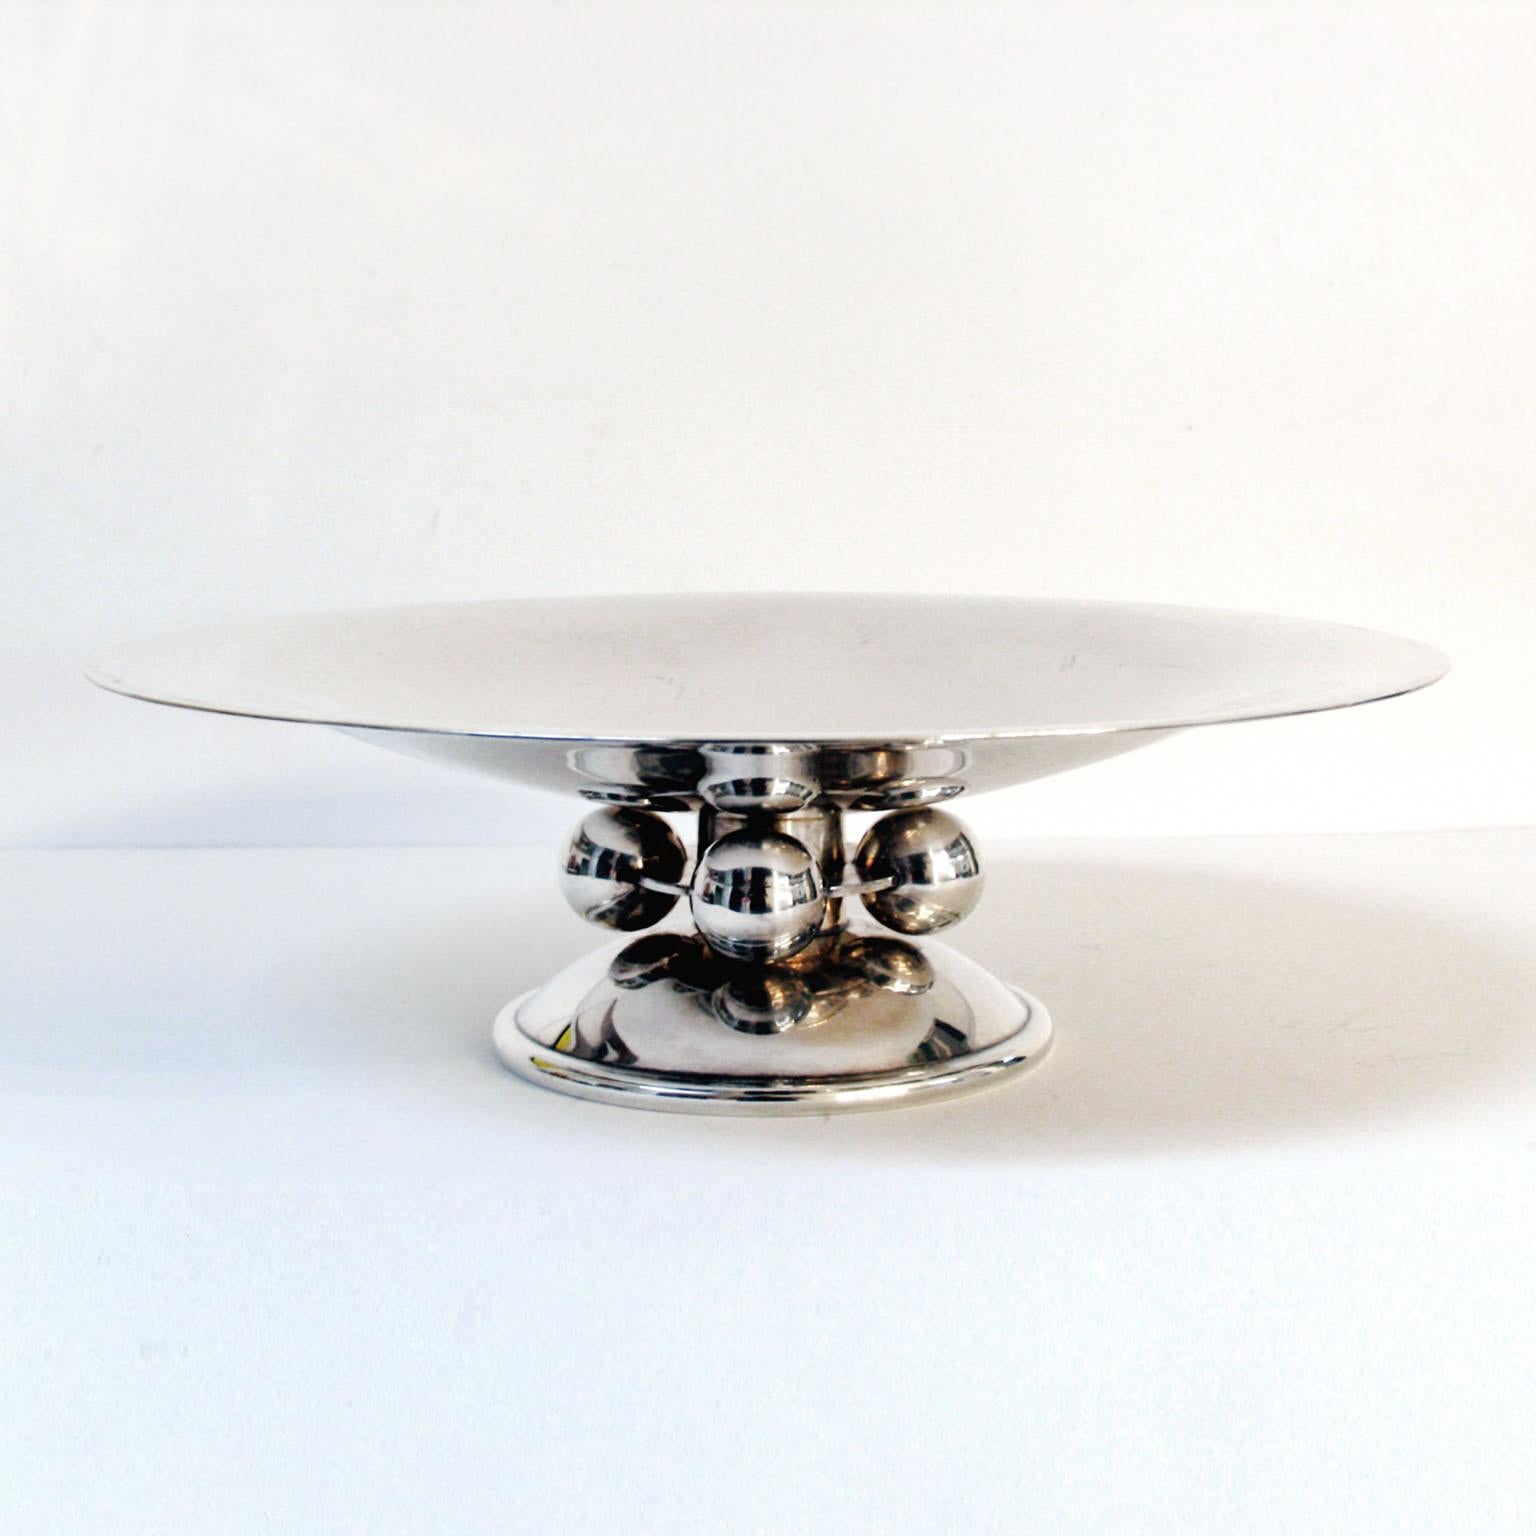 Silver Plate Normandie Fruit Bowl by Luc Lanel for Christofle, 1930s